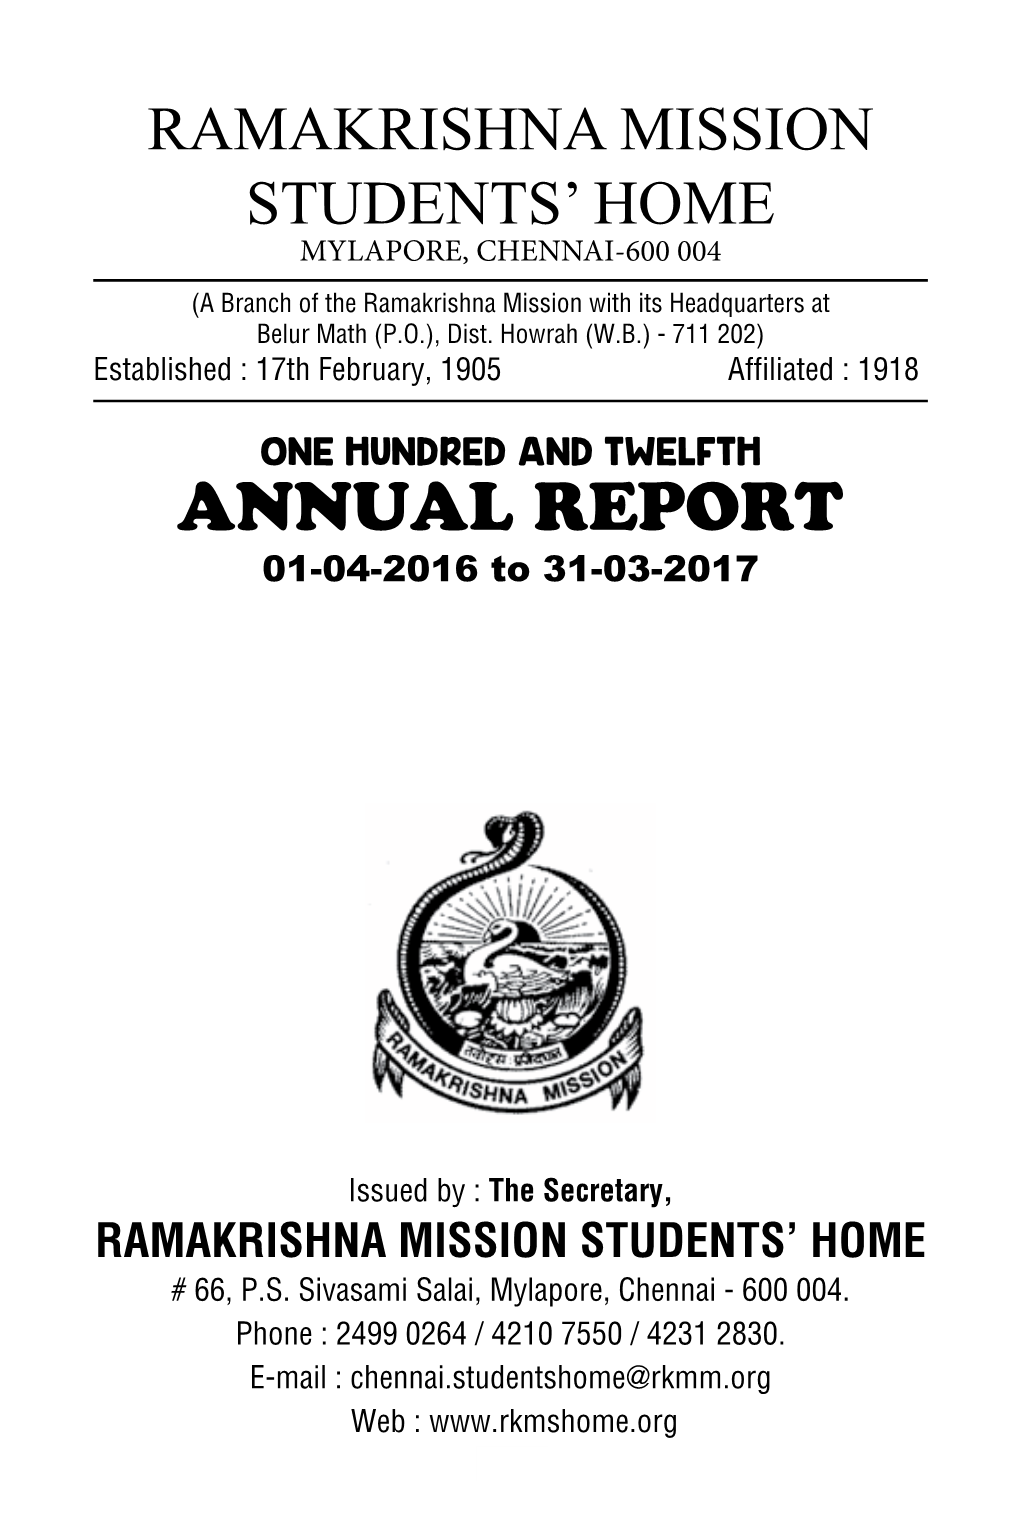 ANNUAL REPORT 01-04-2016 to 31-03-2017